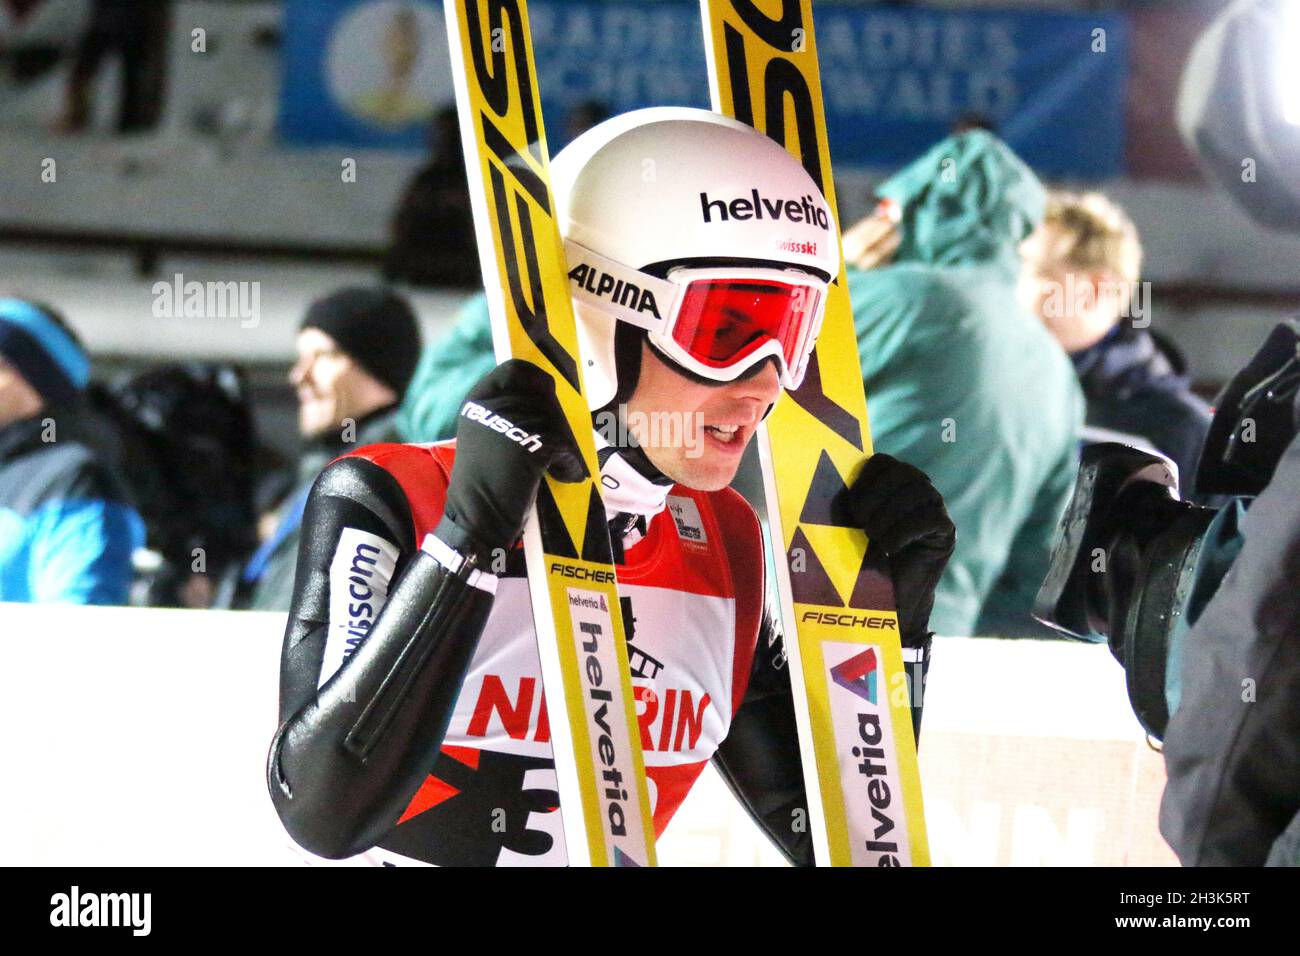 FIS World Cup Ski Jumping 17-18, Neustadt, individual competition Stock Photo